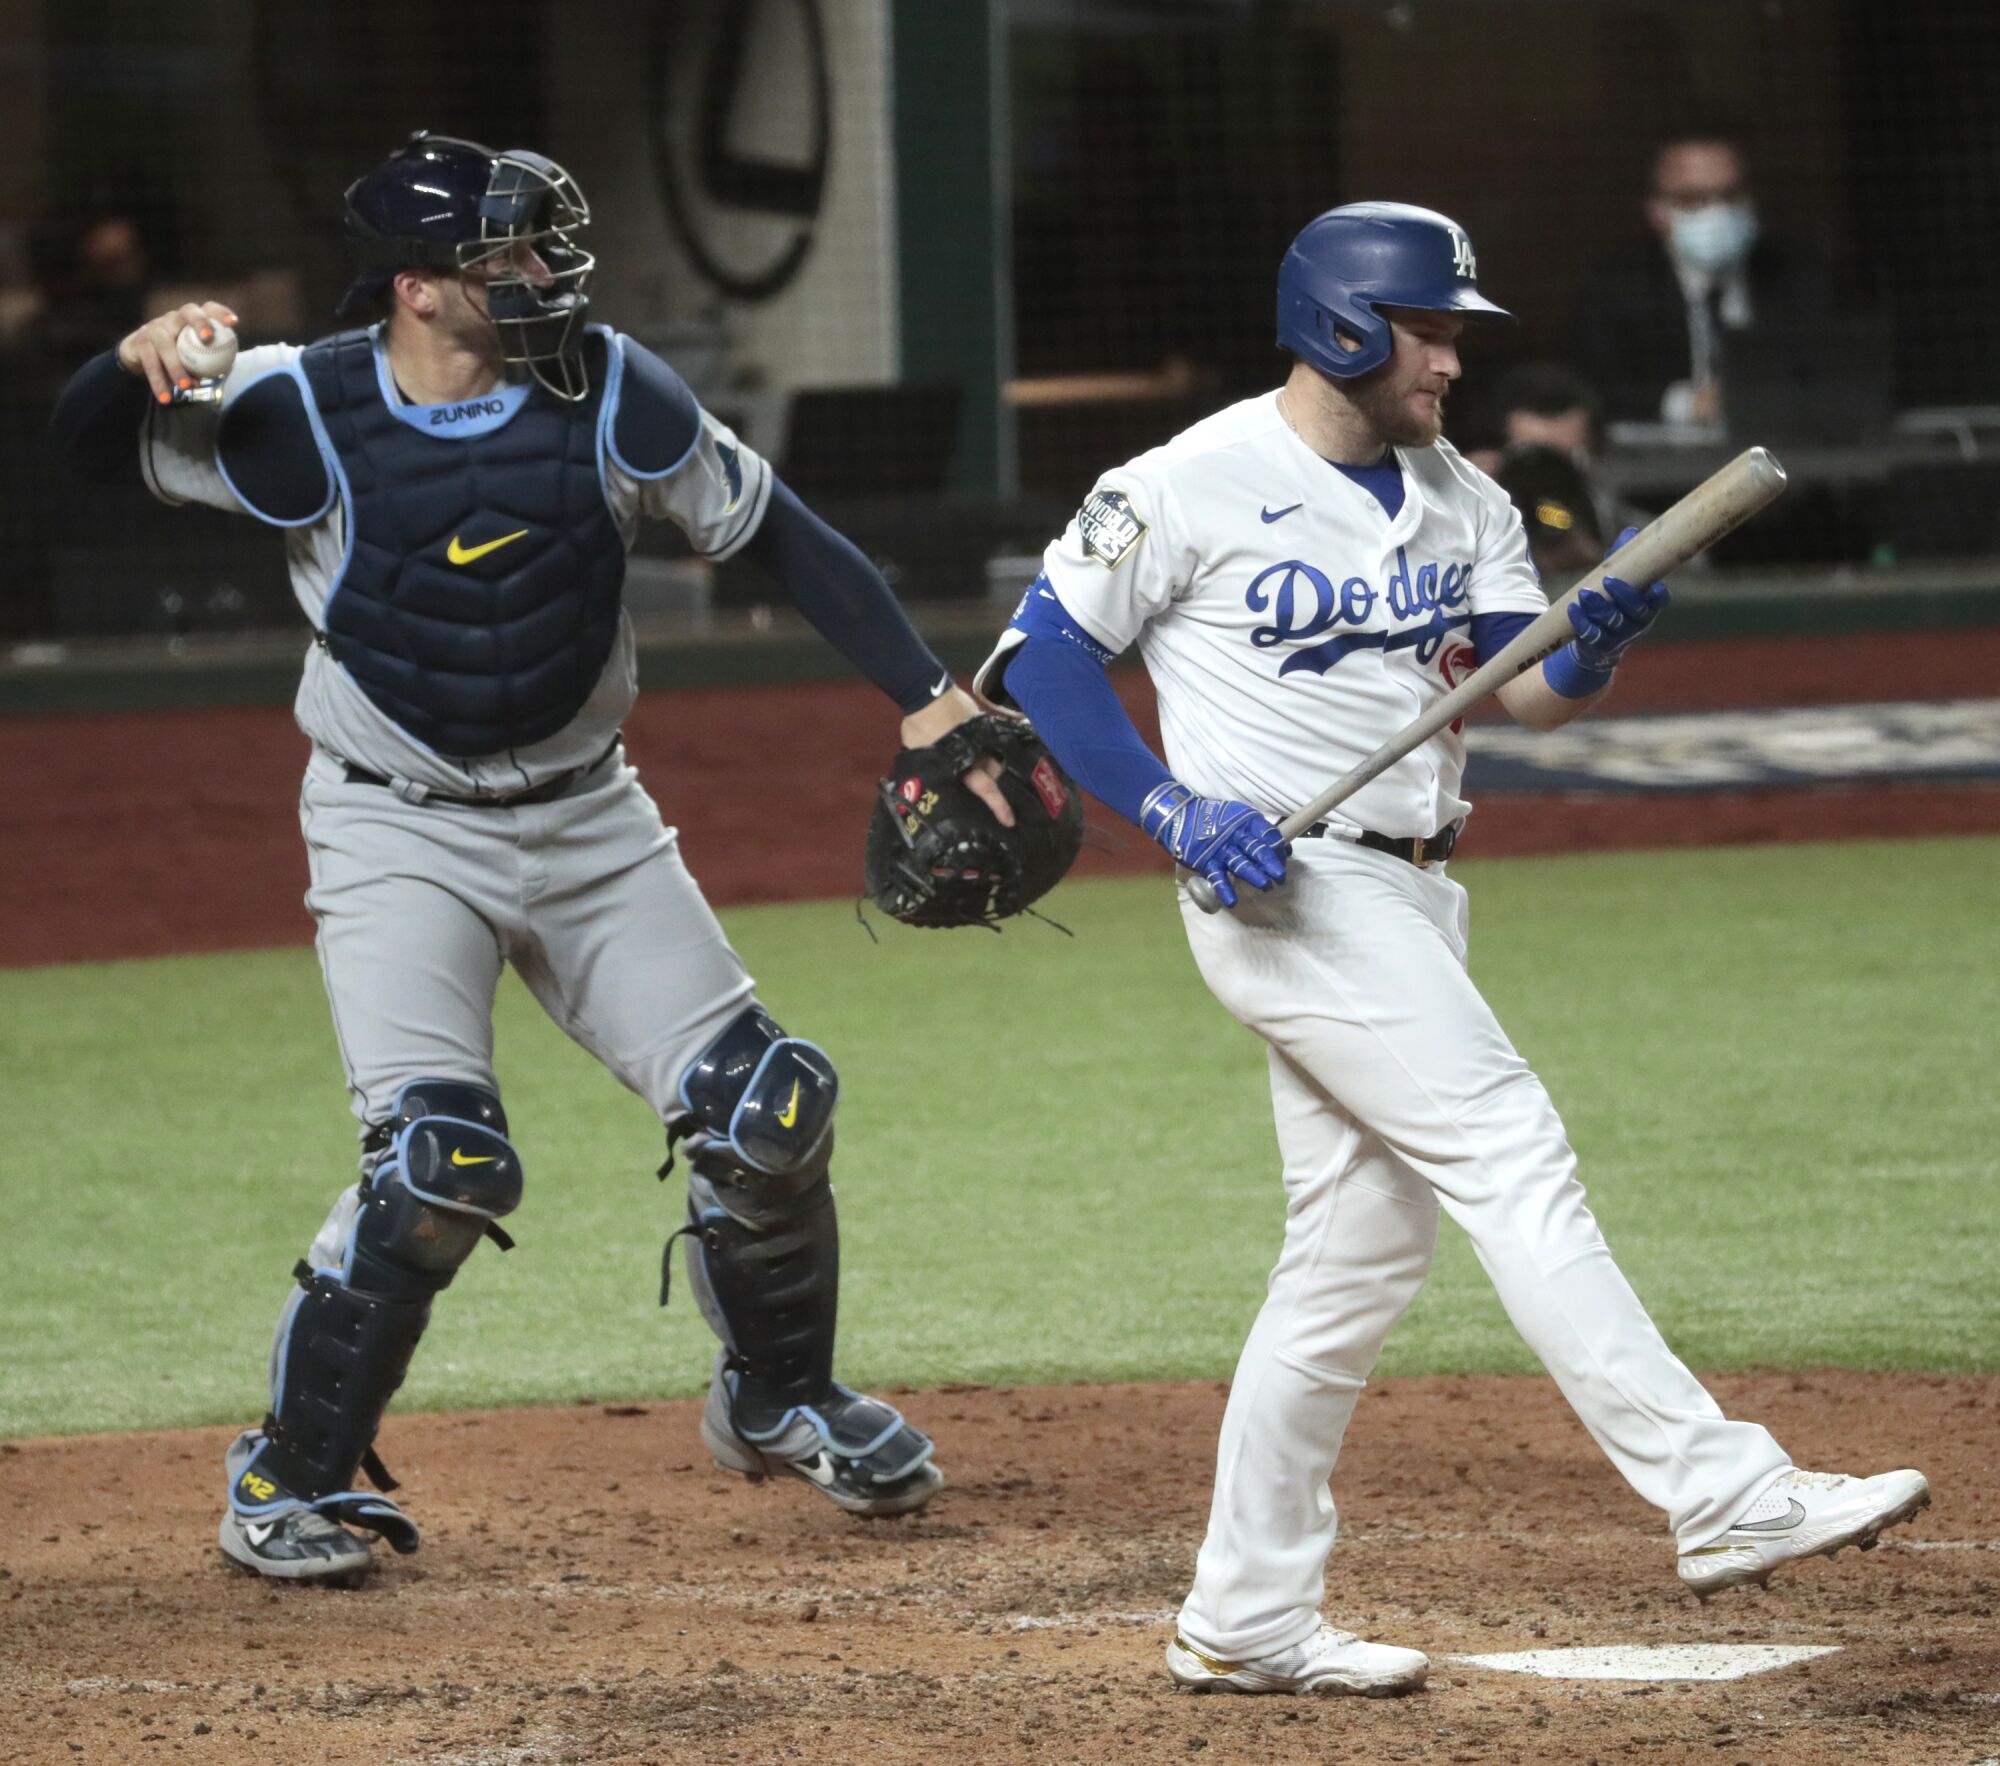 Dodgers first baseman Max Muncy strikes out in the fourth inning.